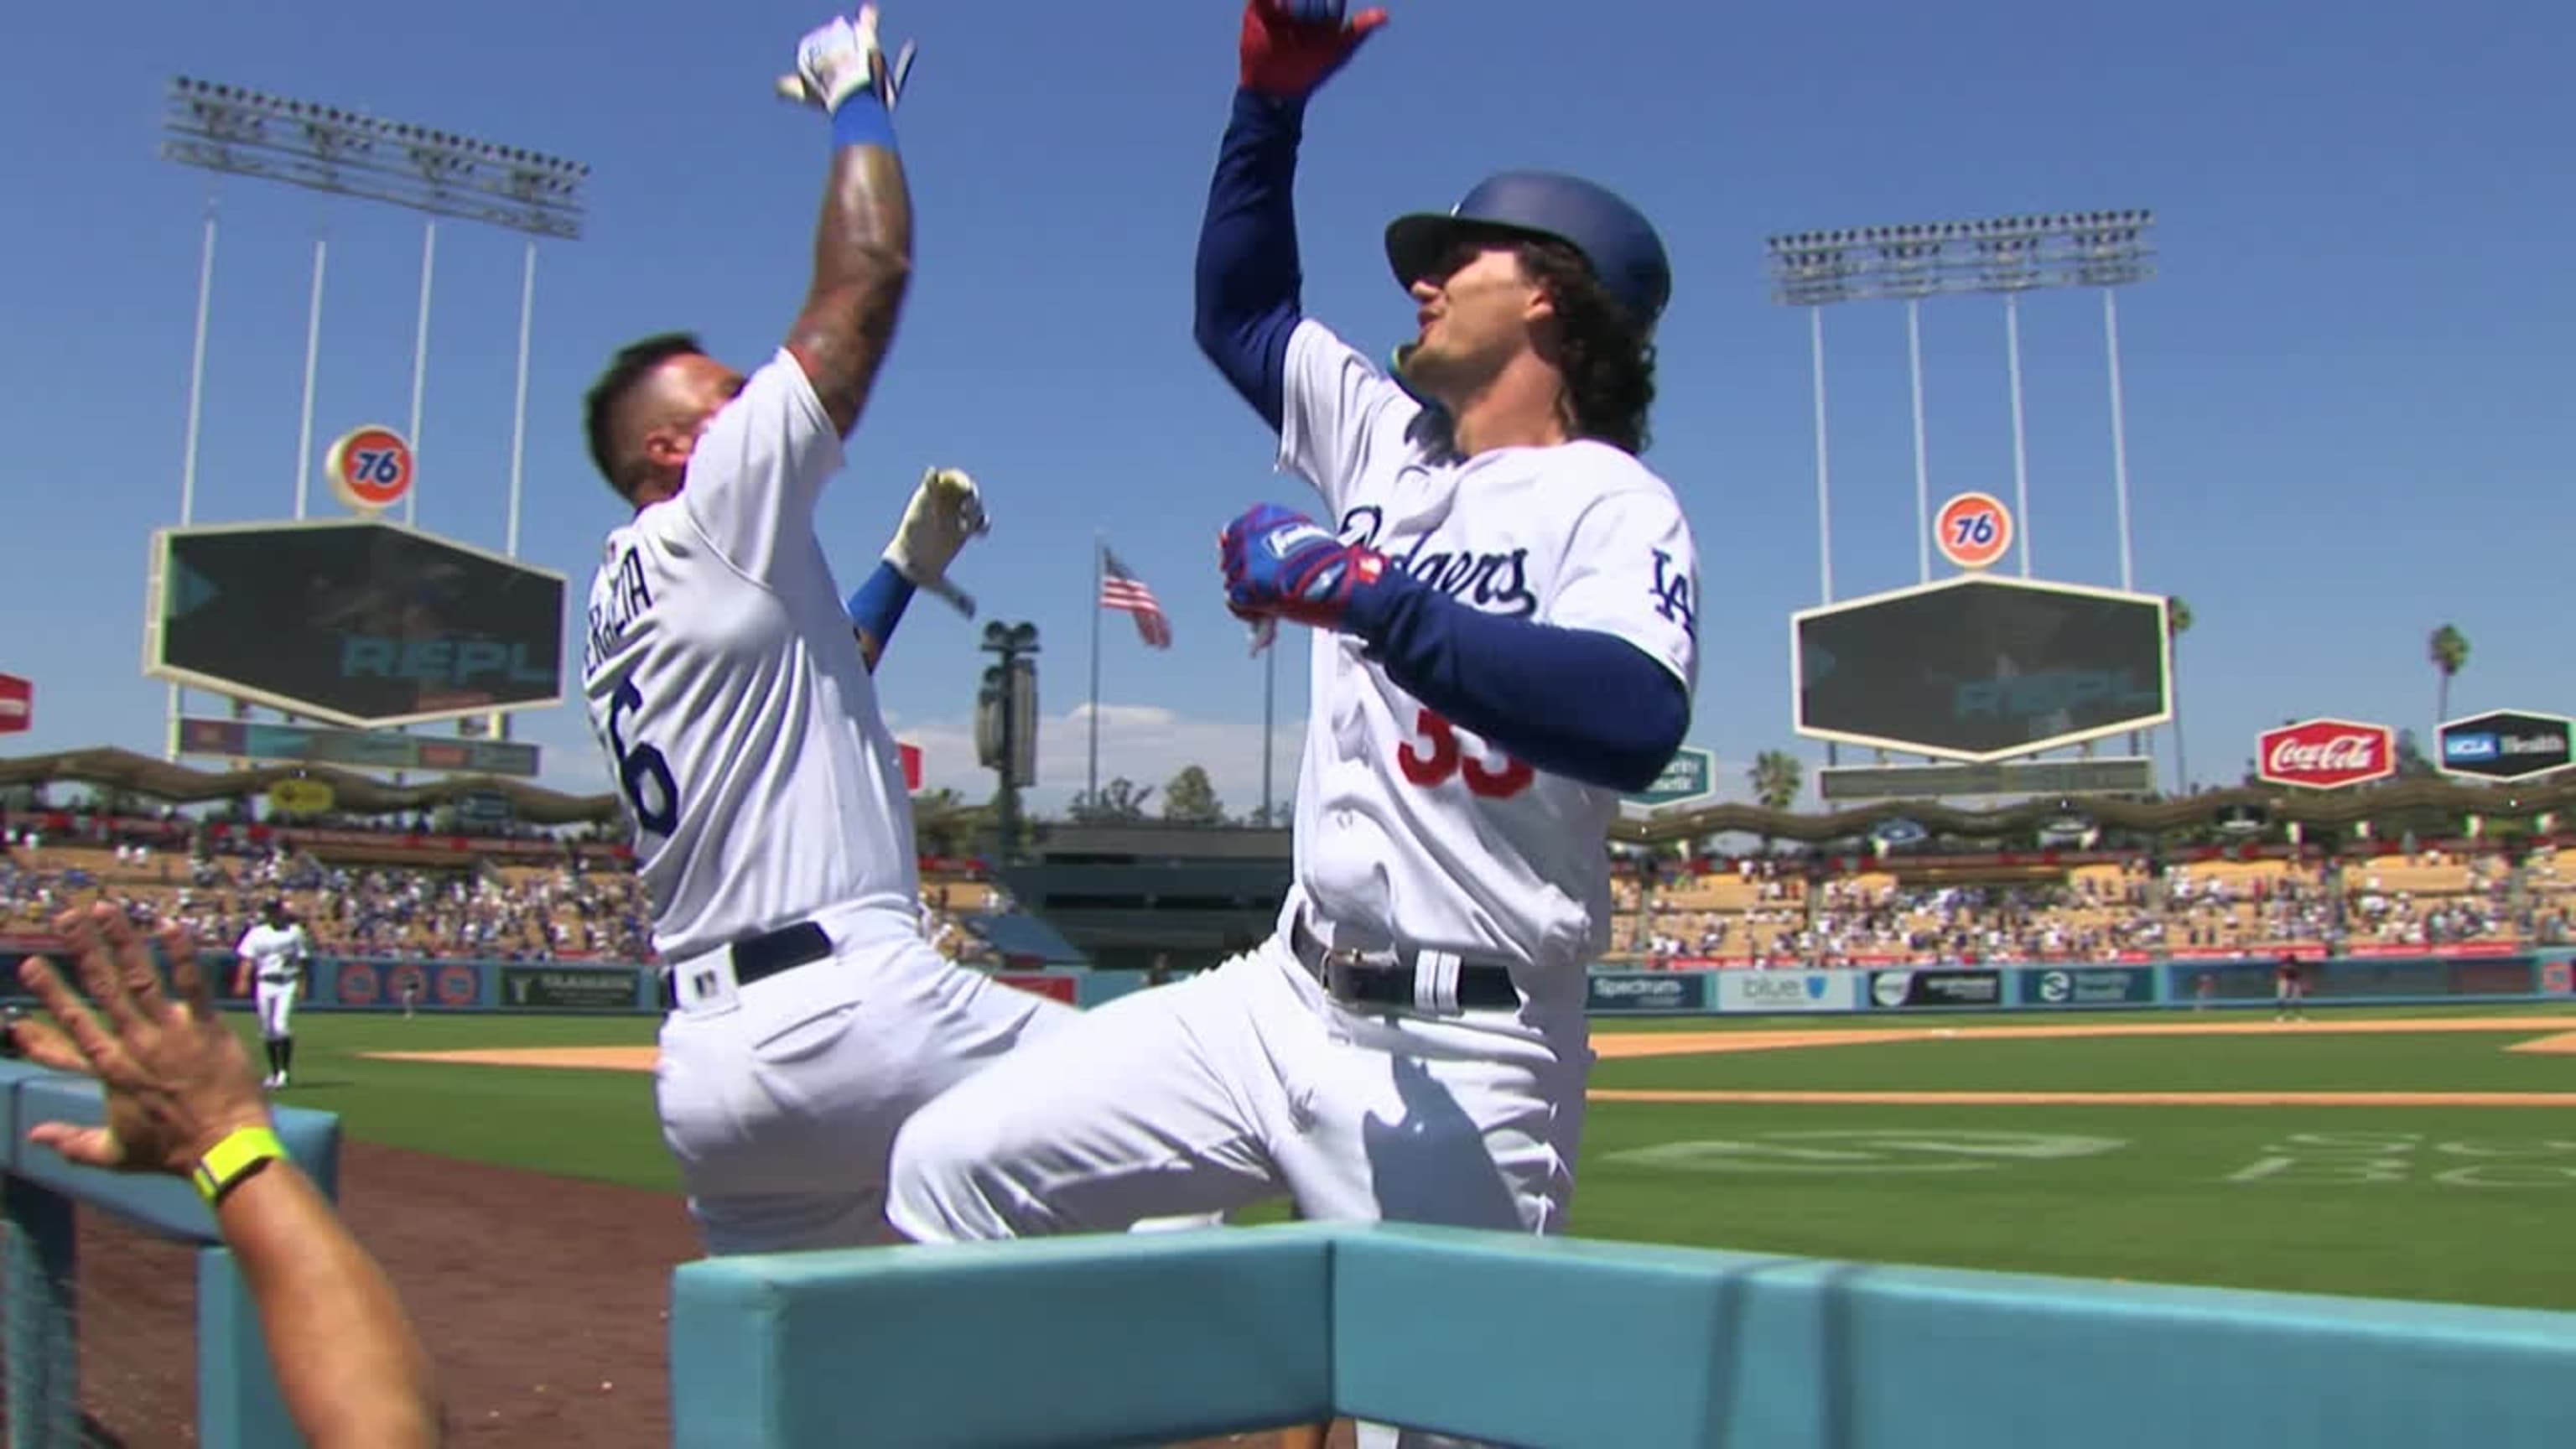 Outman grand slam lifts Dodgers past Twins